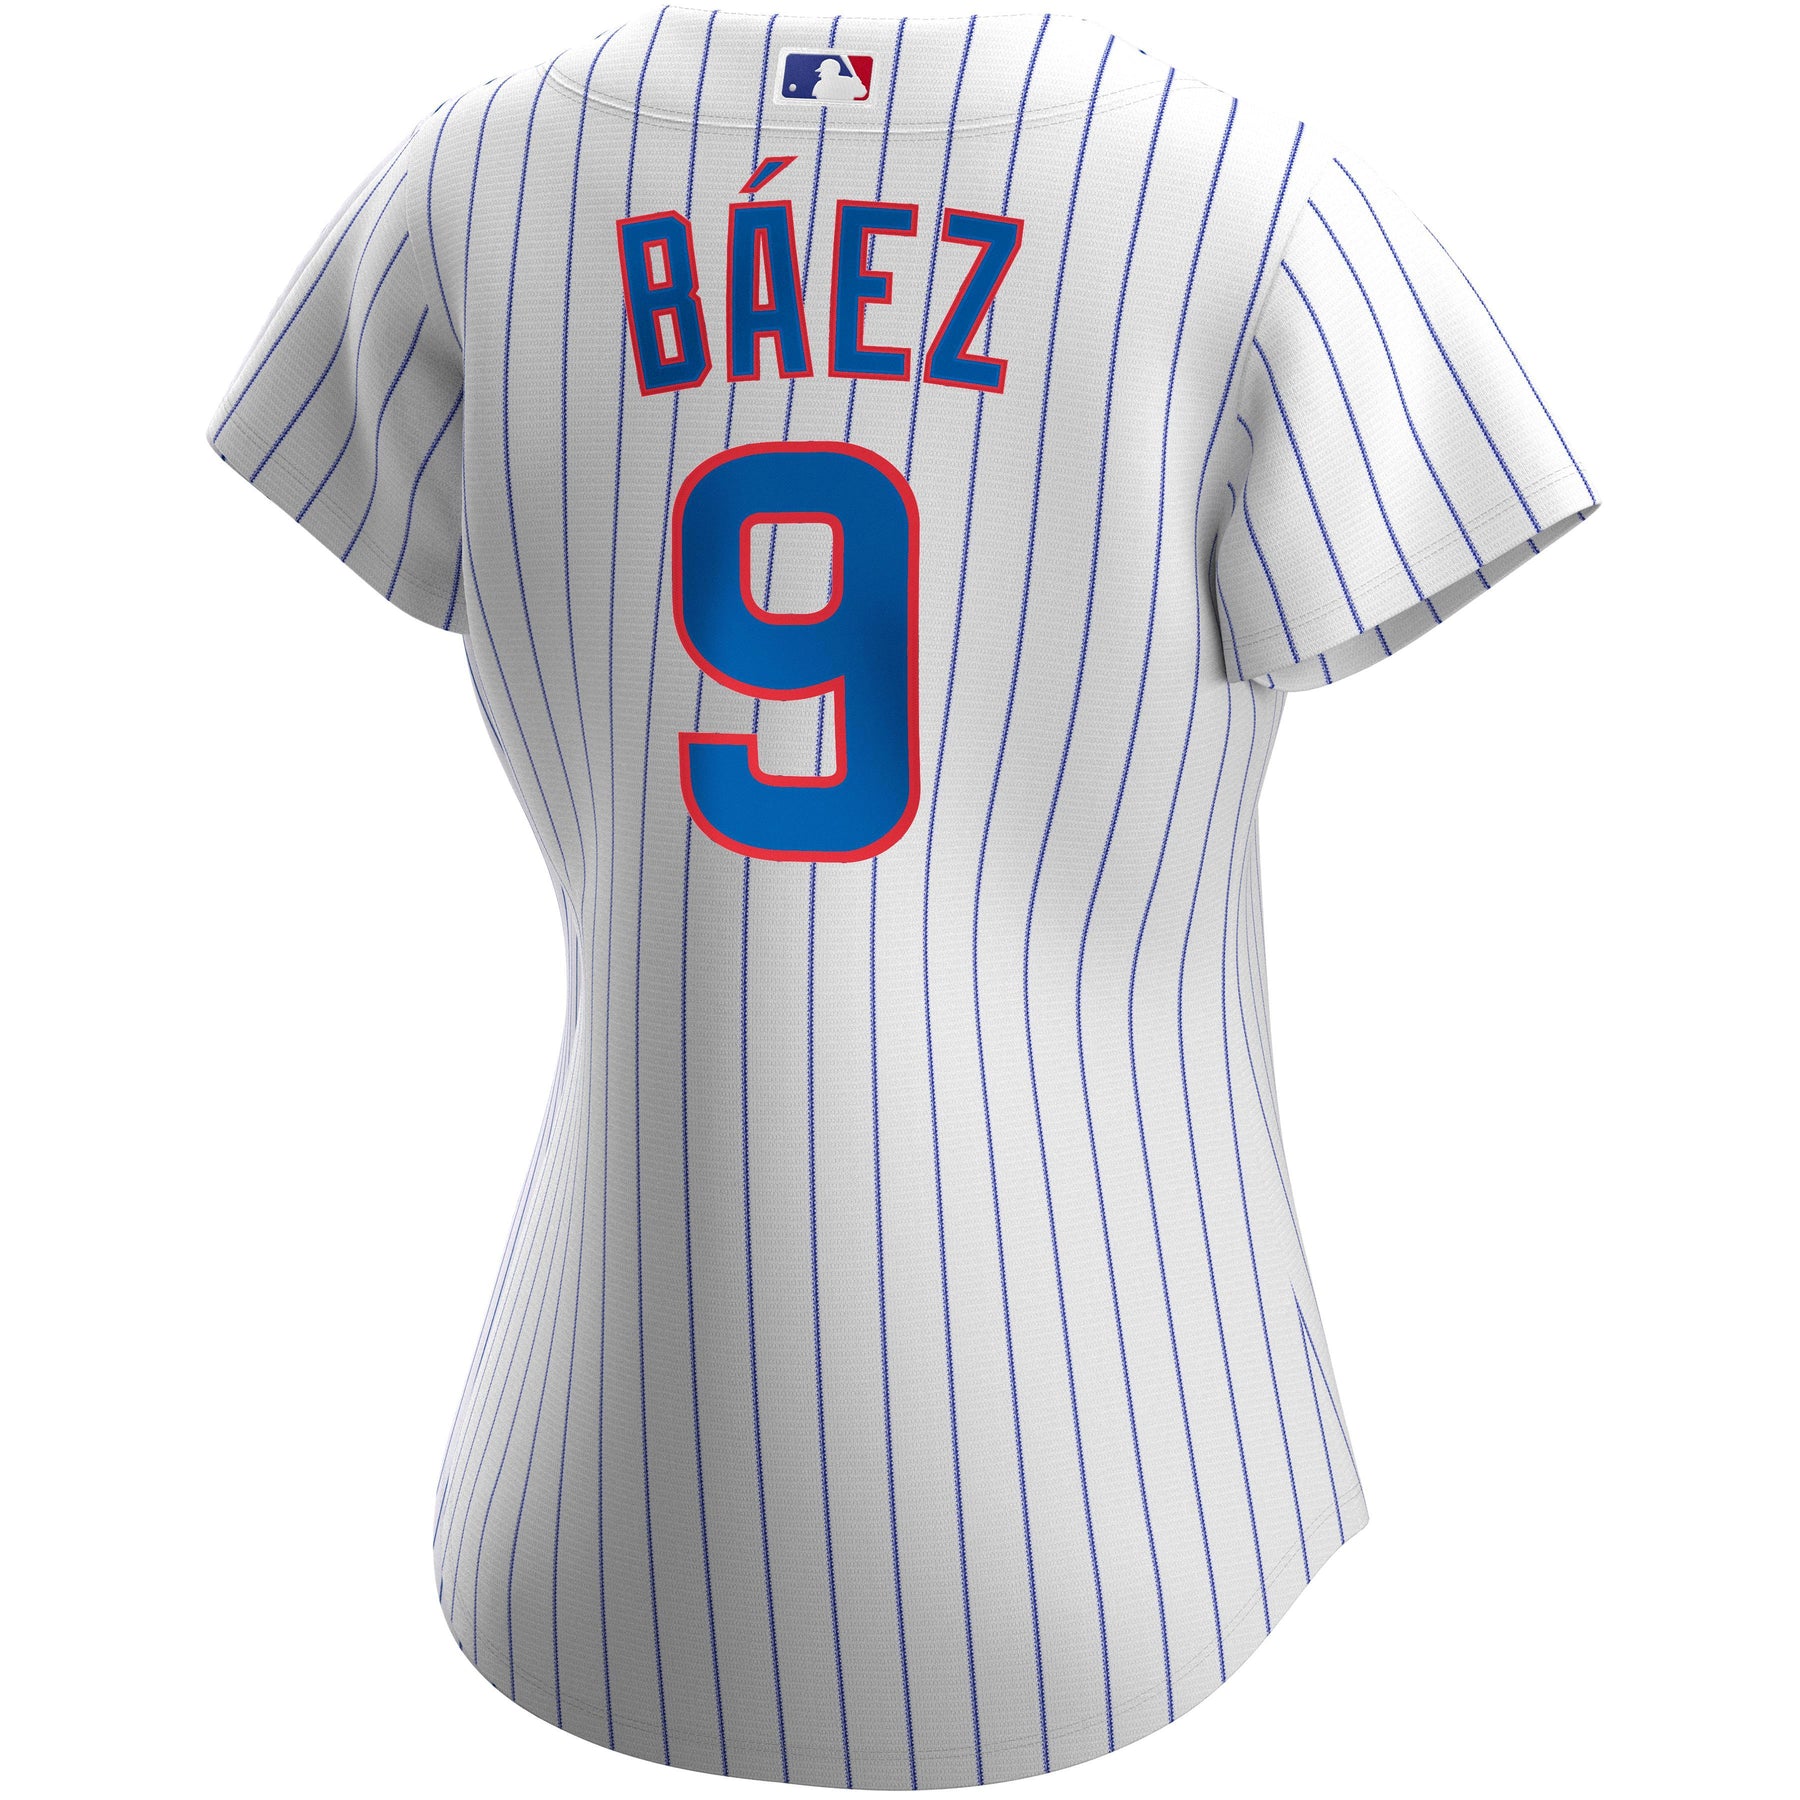 womens chicago cubs jersey